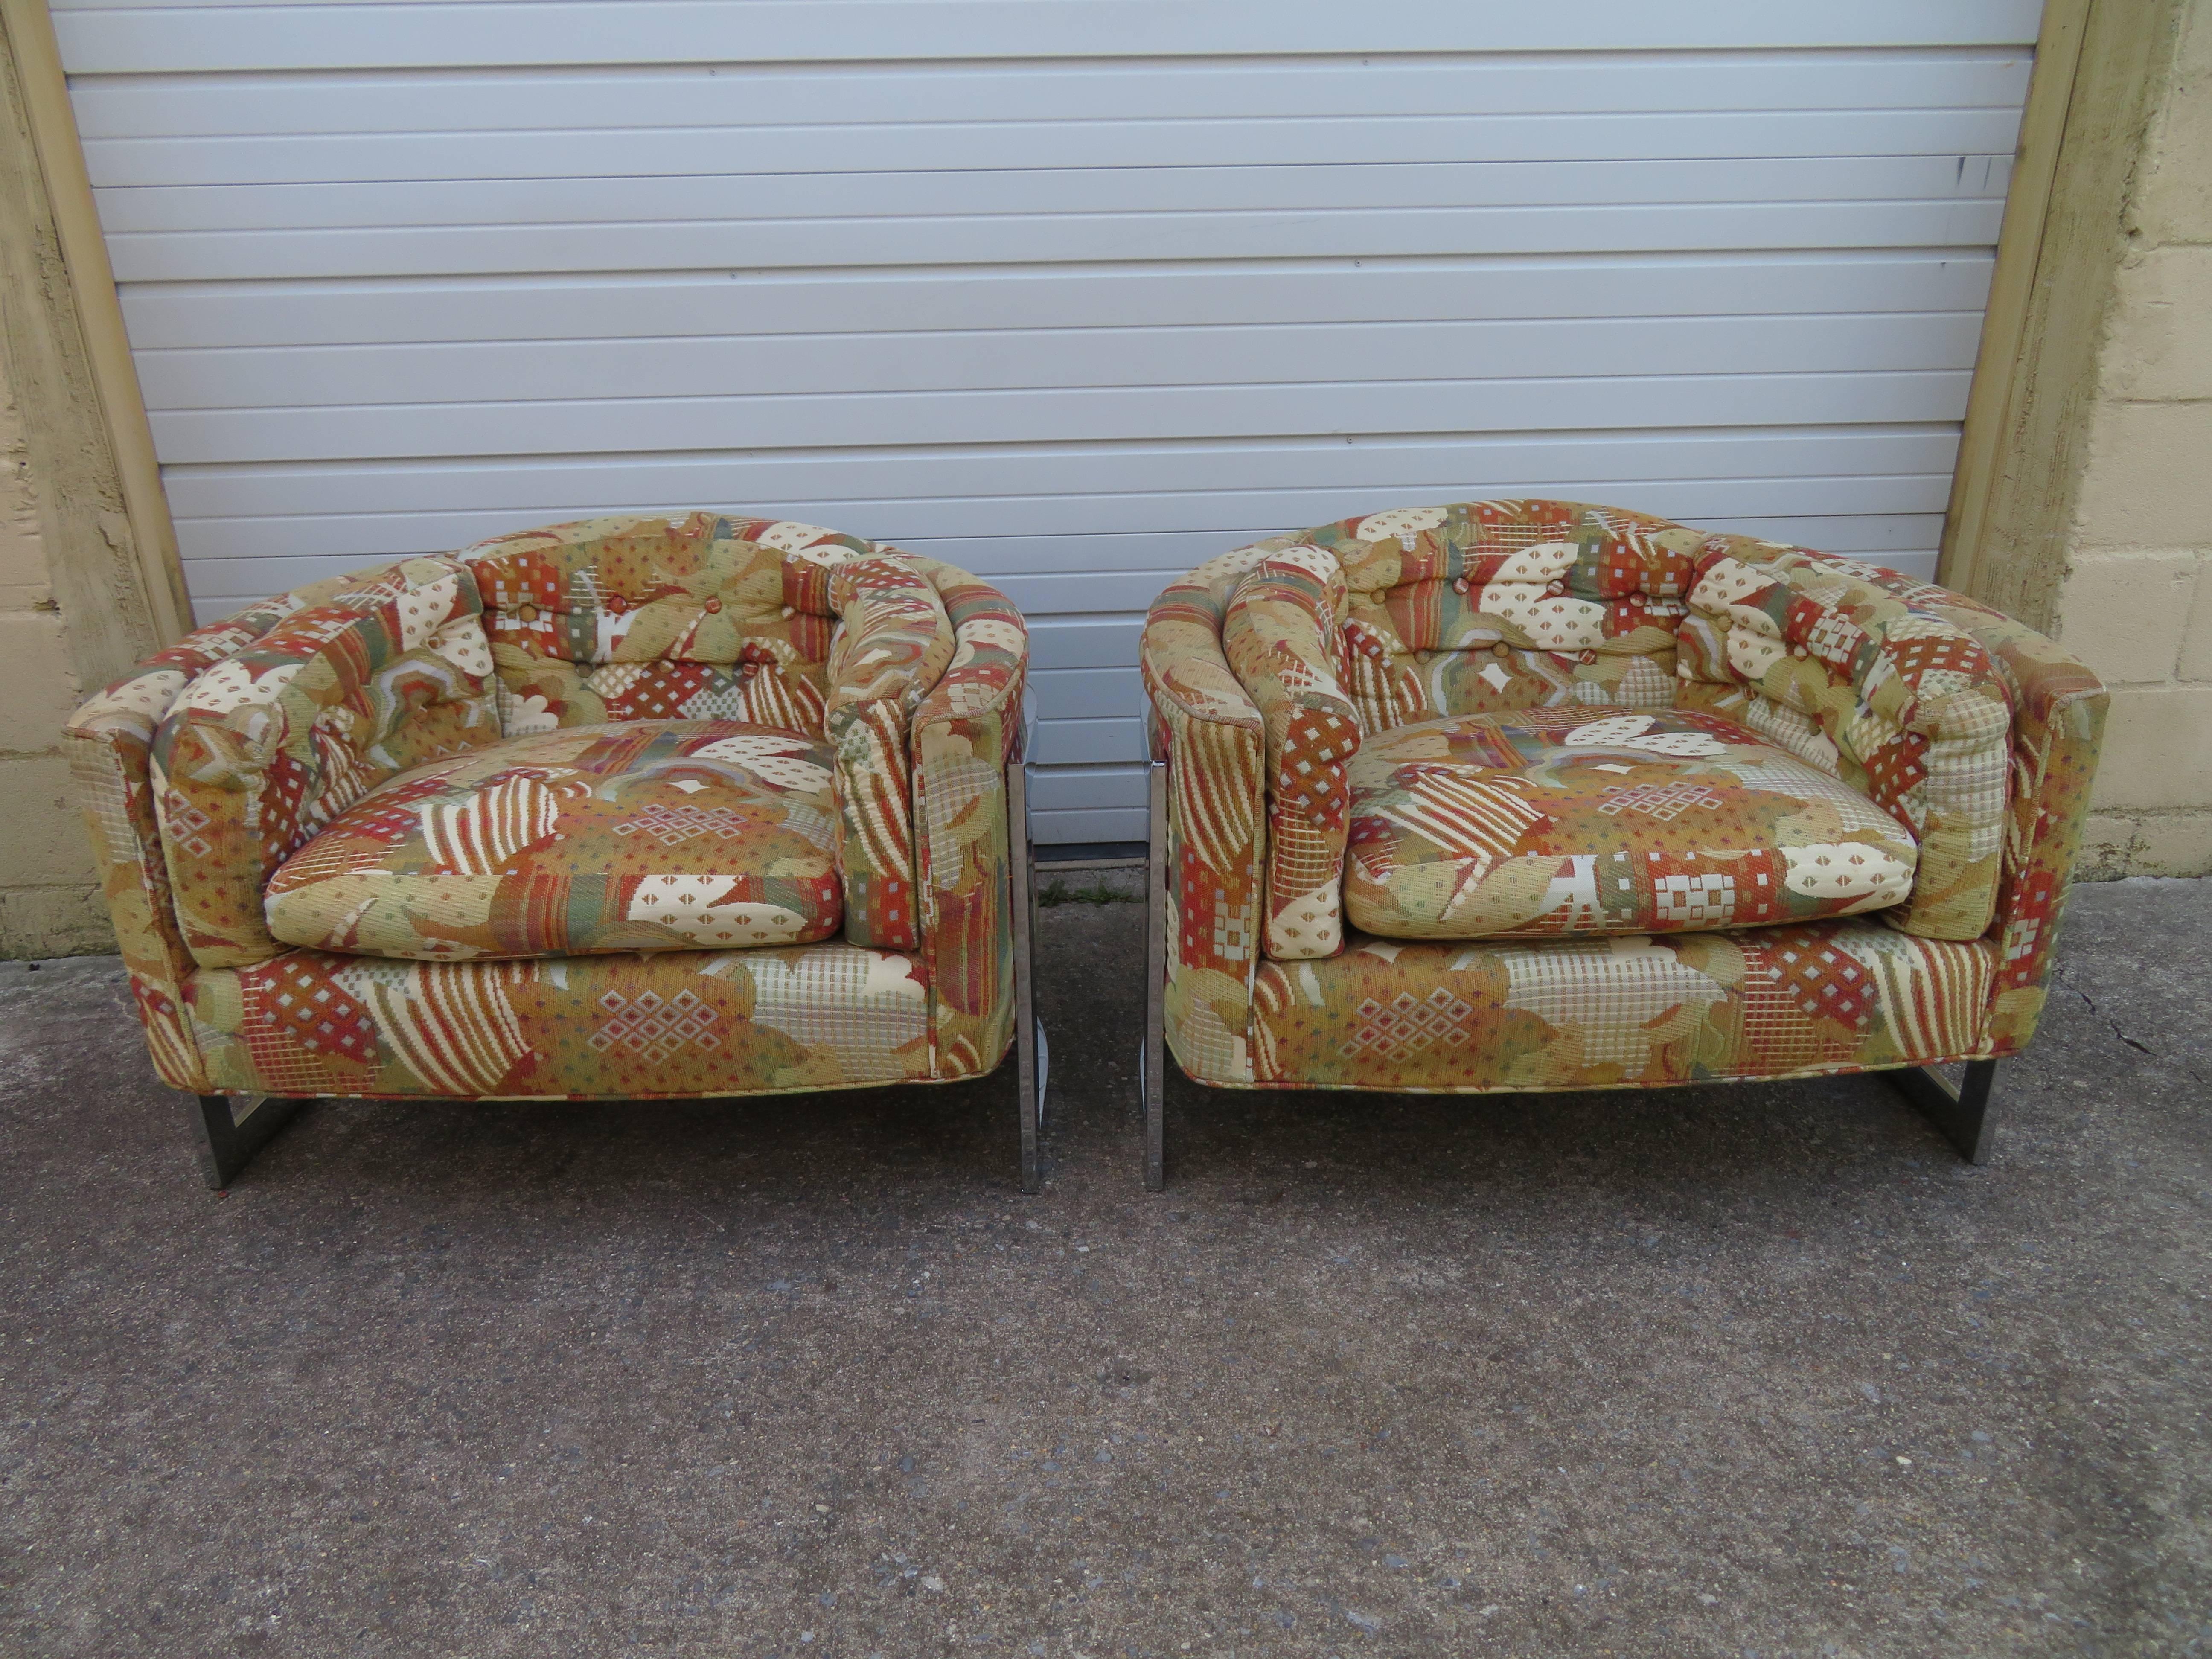 Fabulous pair of Metropolitan wide seat barrel back lounge chairs designed by Jules Heumann. These will need to be re-upholstered but that's what you designers are looking for anyway-right? These chairs measure 26.5" T x 38" W x 30" D